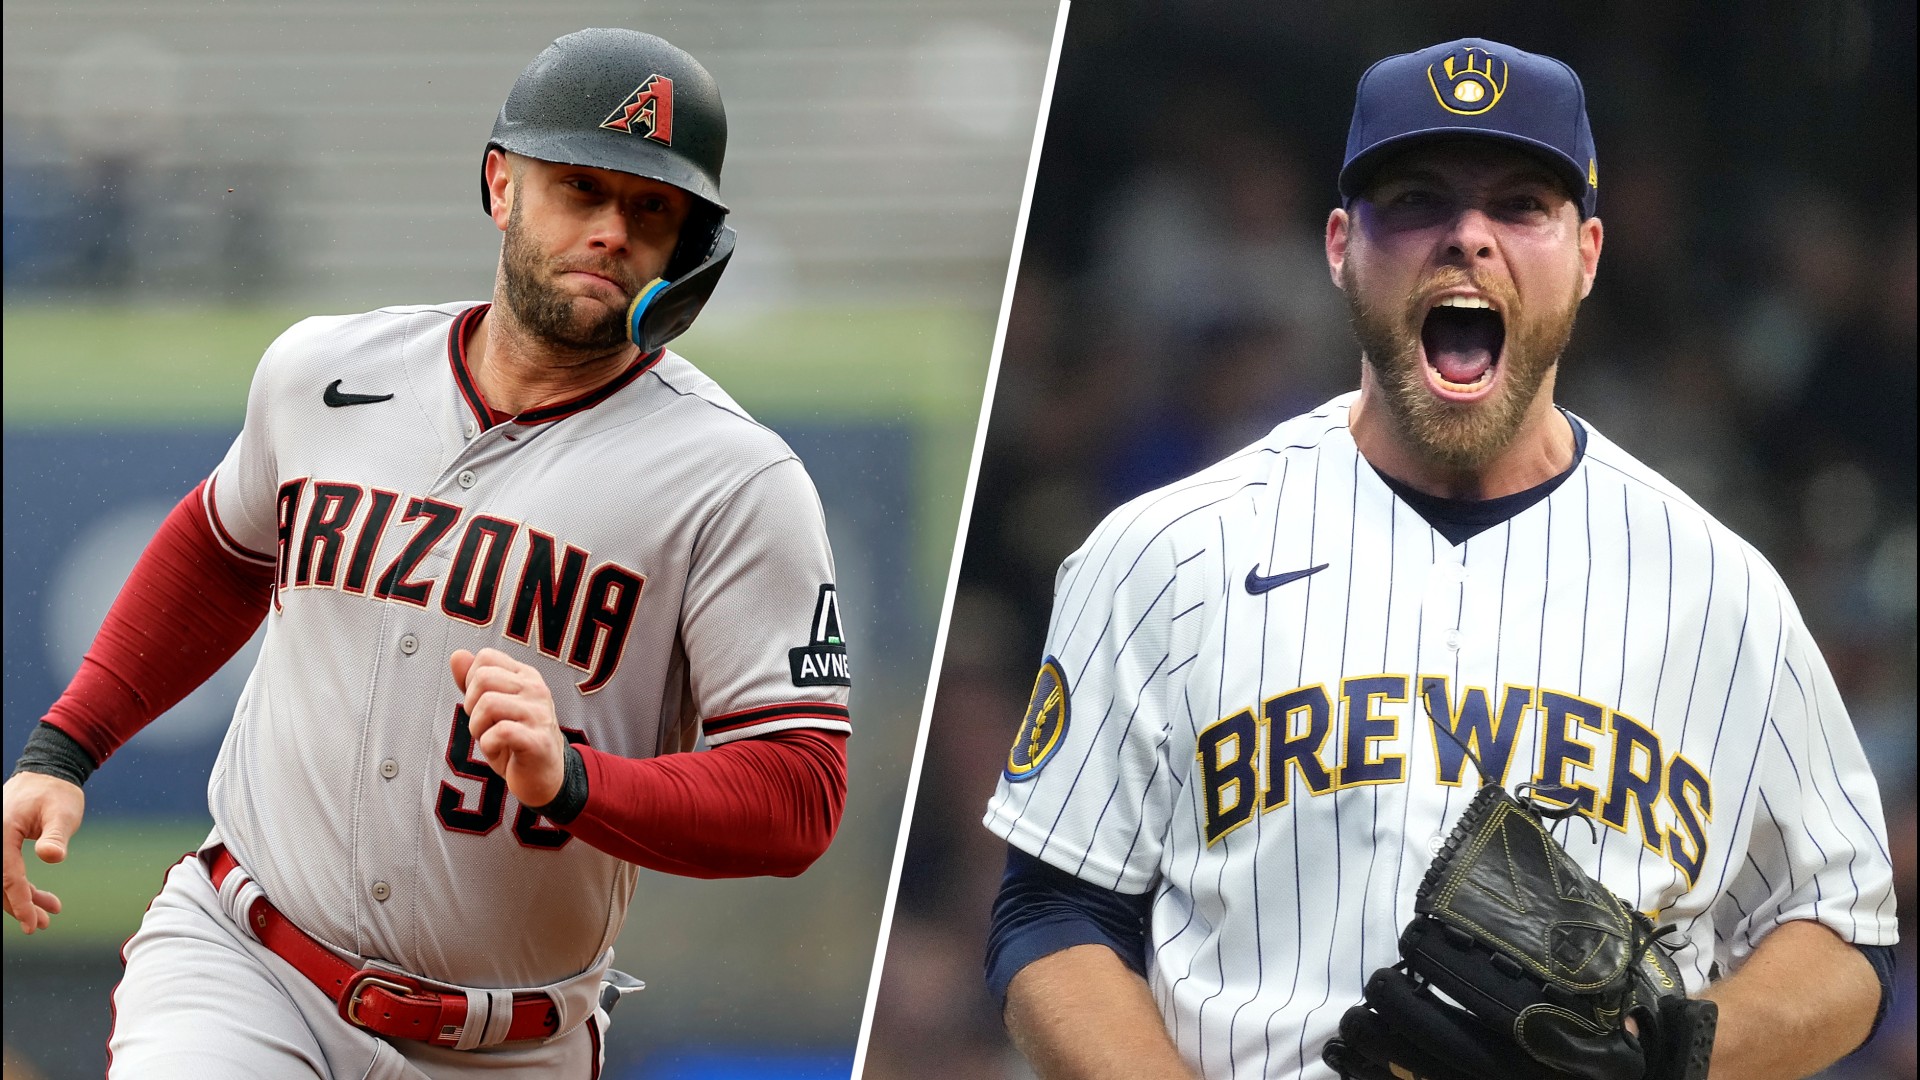 Diamondbacks to face Brewers in NL Wild Card playoff matchup